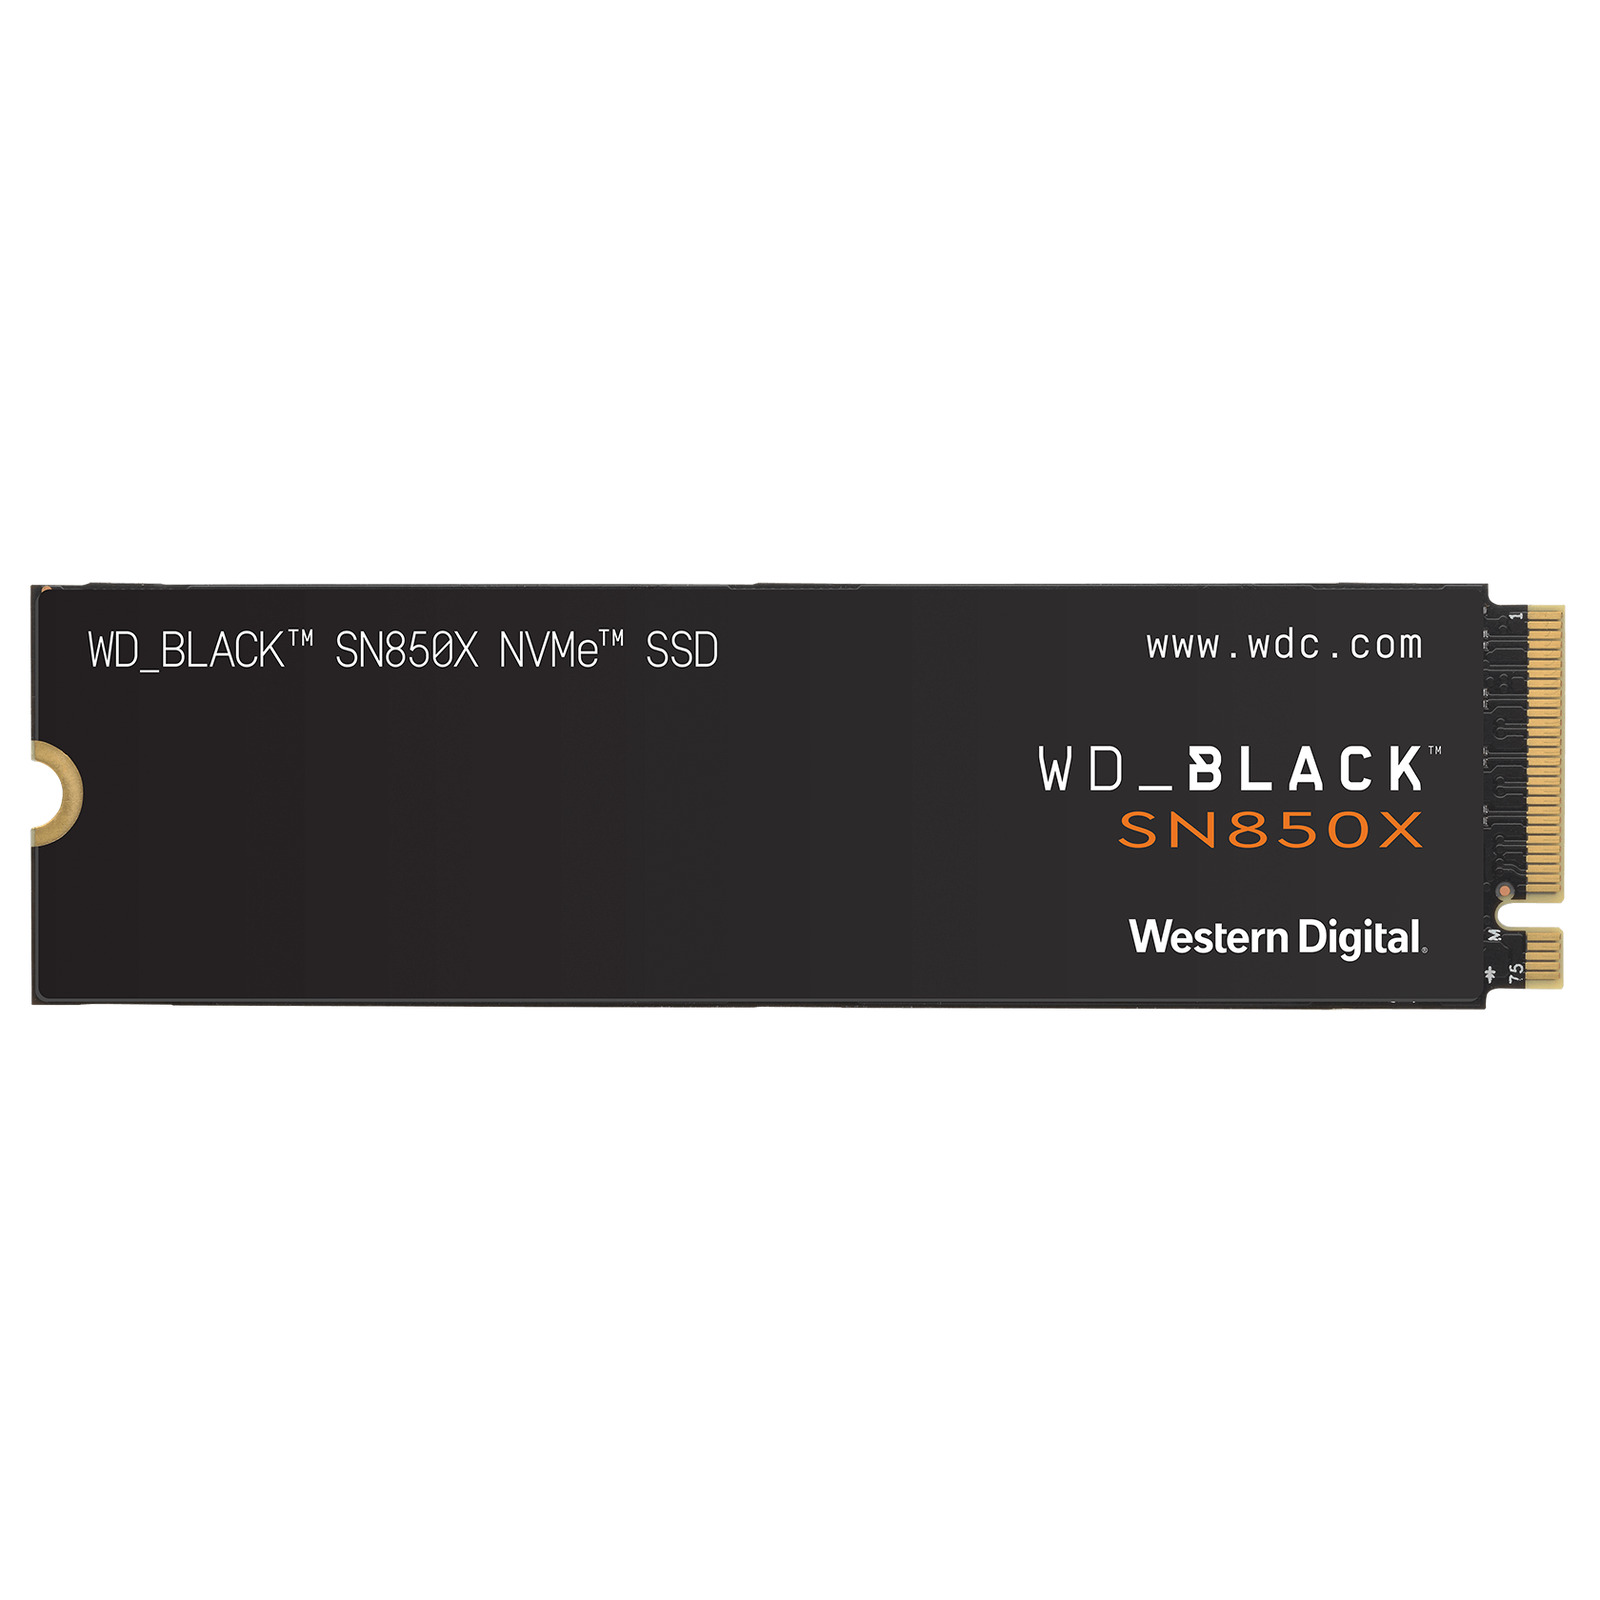 WD_BLACK 2TB SN850X NVMe SSD, Internal Gaming Solid State Drive - WDS200T2X0E